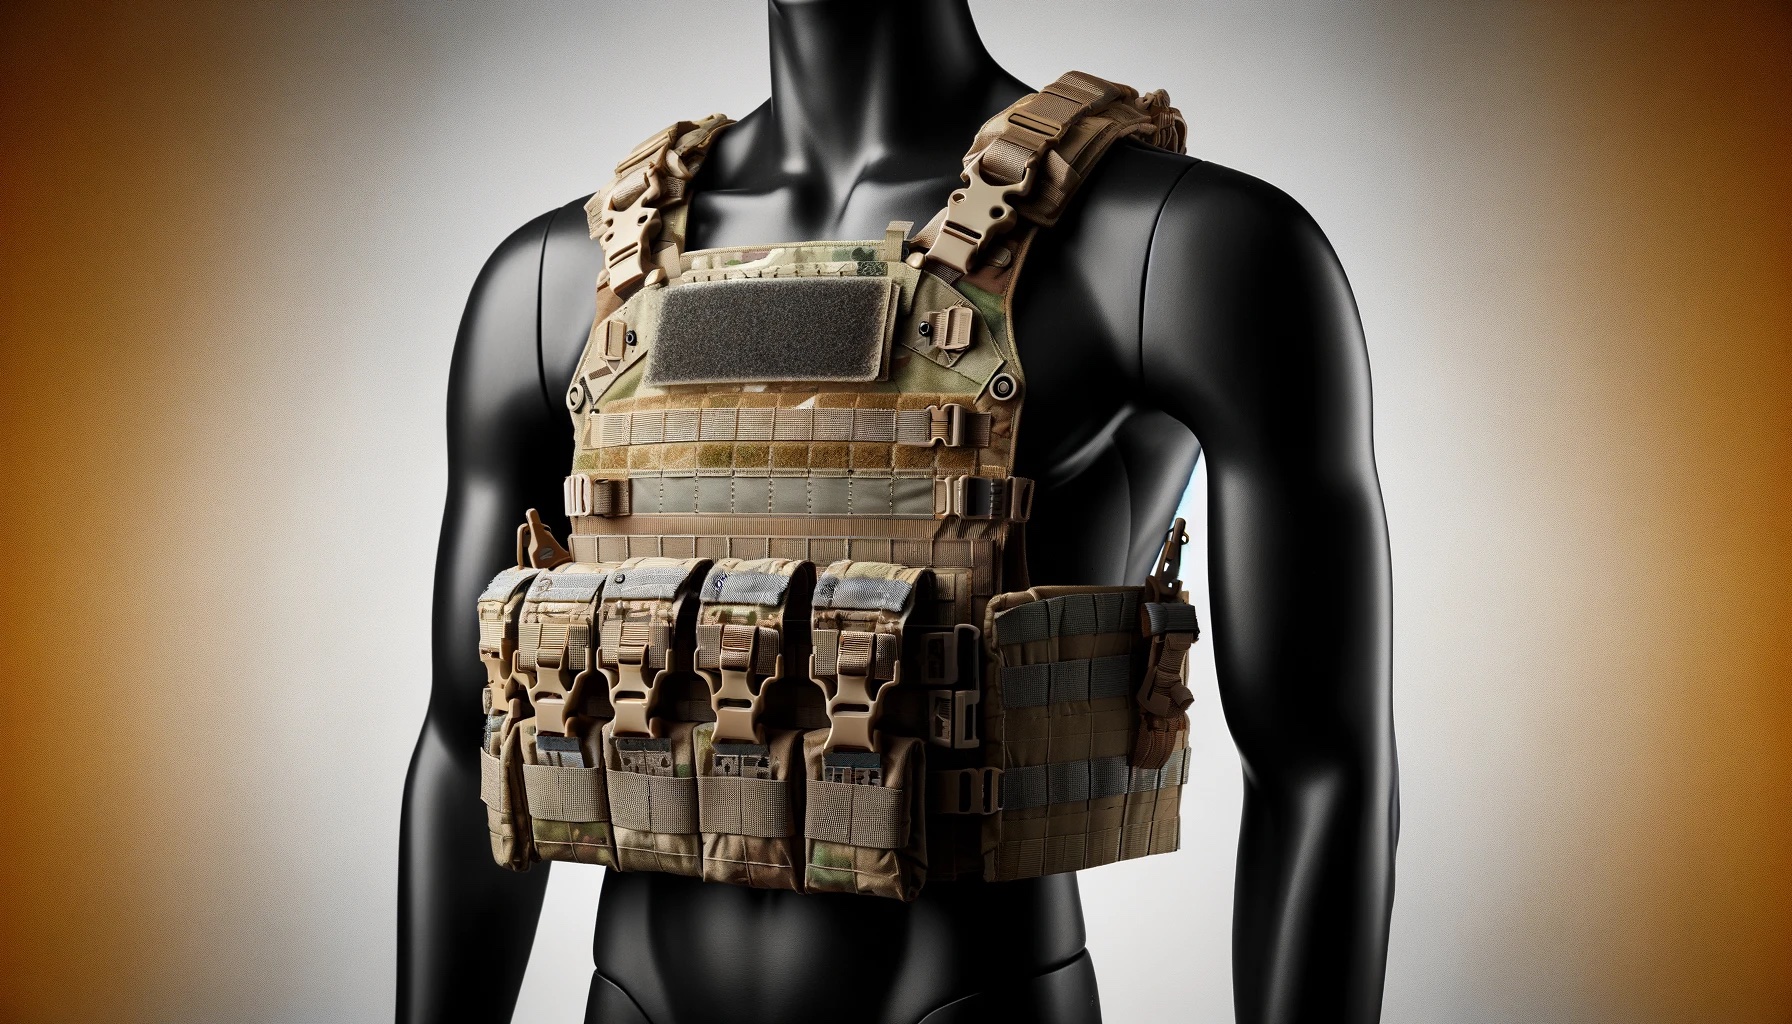 Best Airsoft Plate Carrier